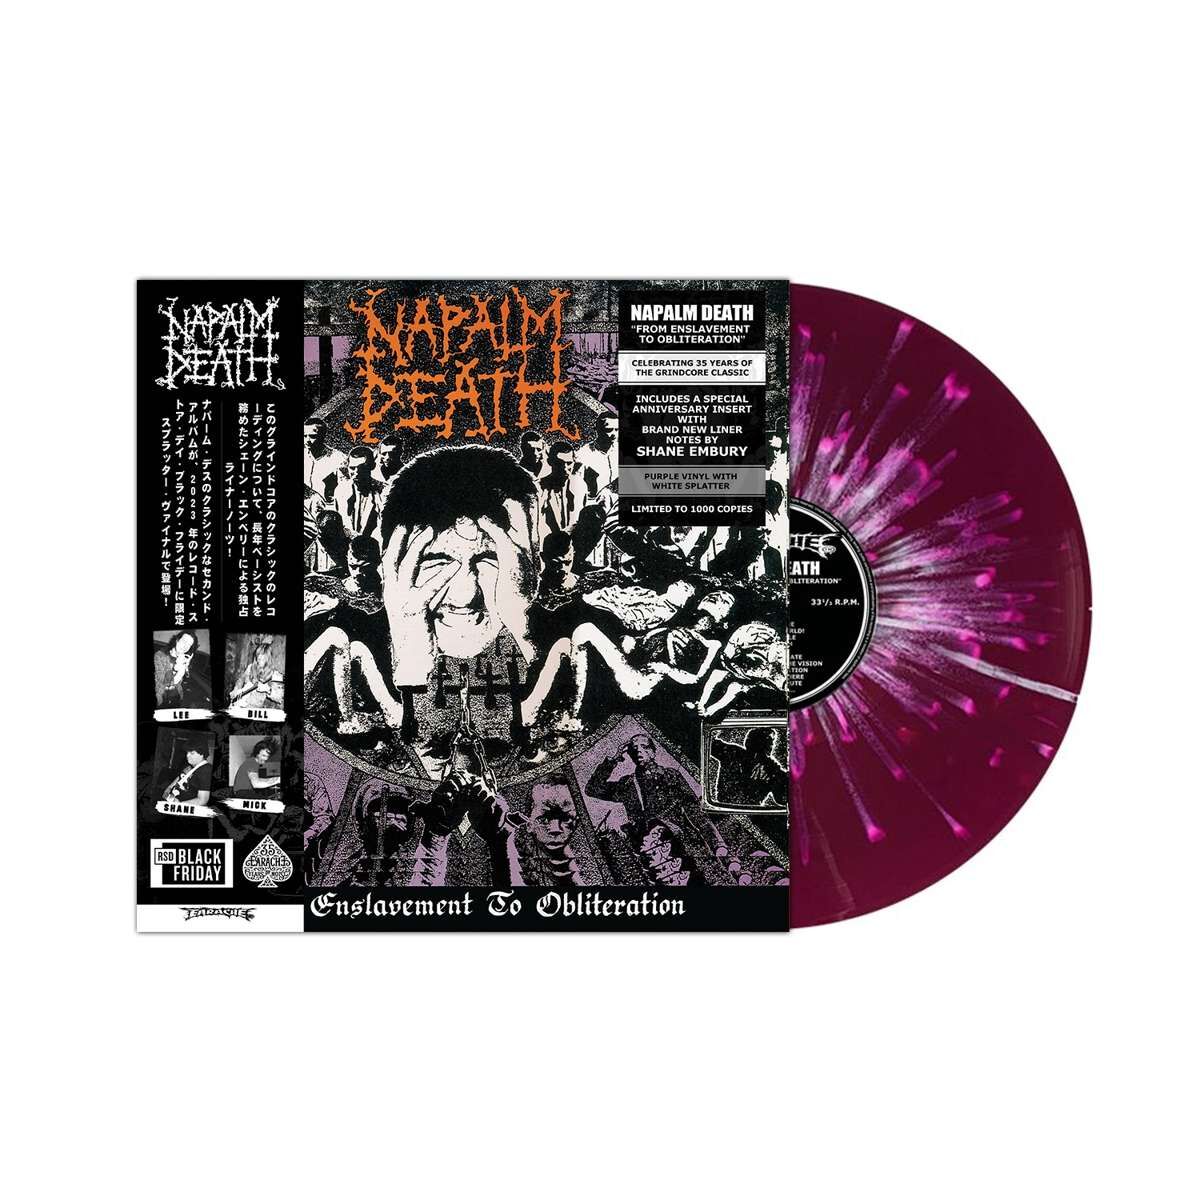 Image of LP di Napalm Death - From enslavement to obliteration - Unisex - standard